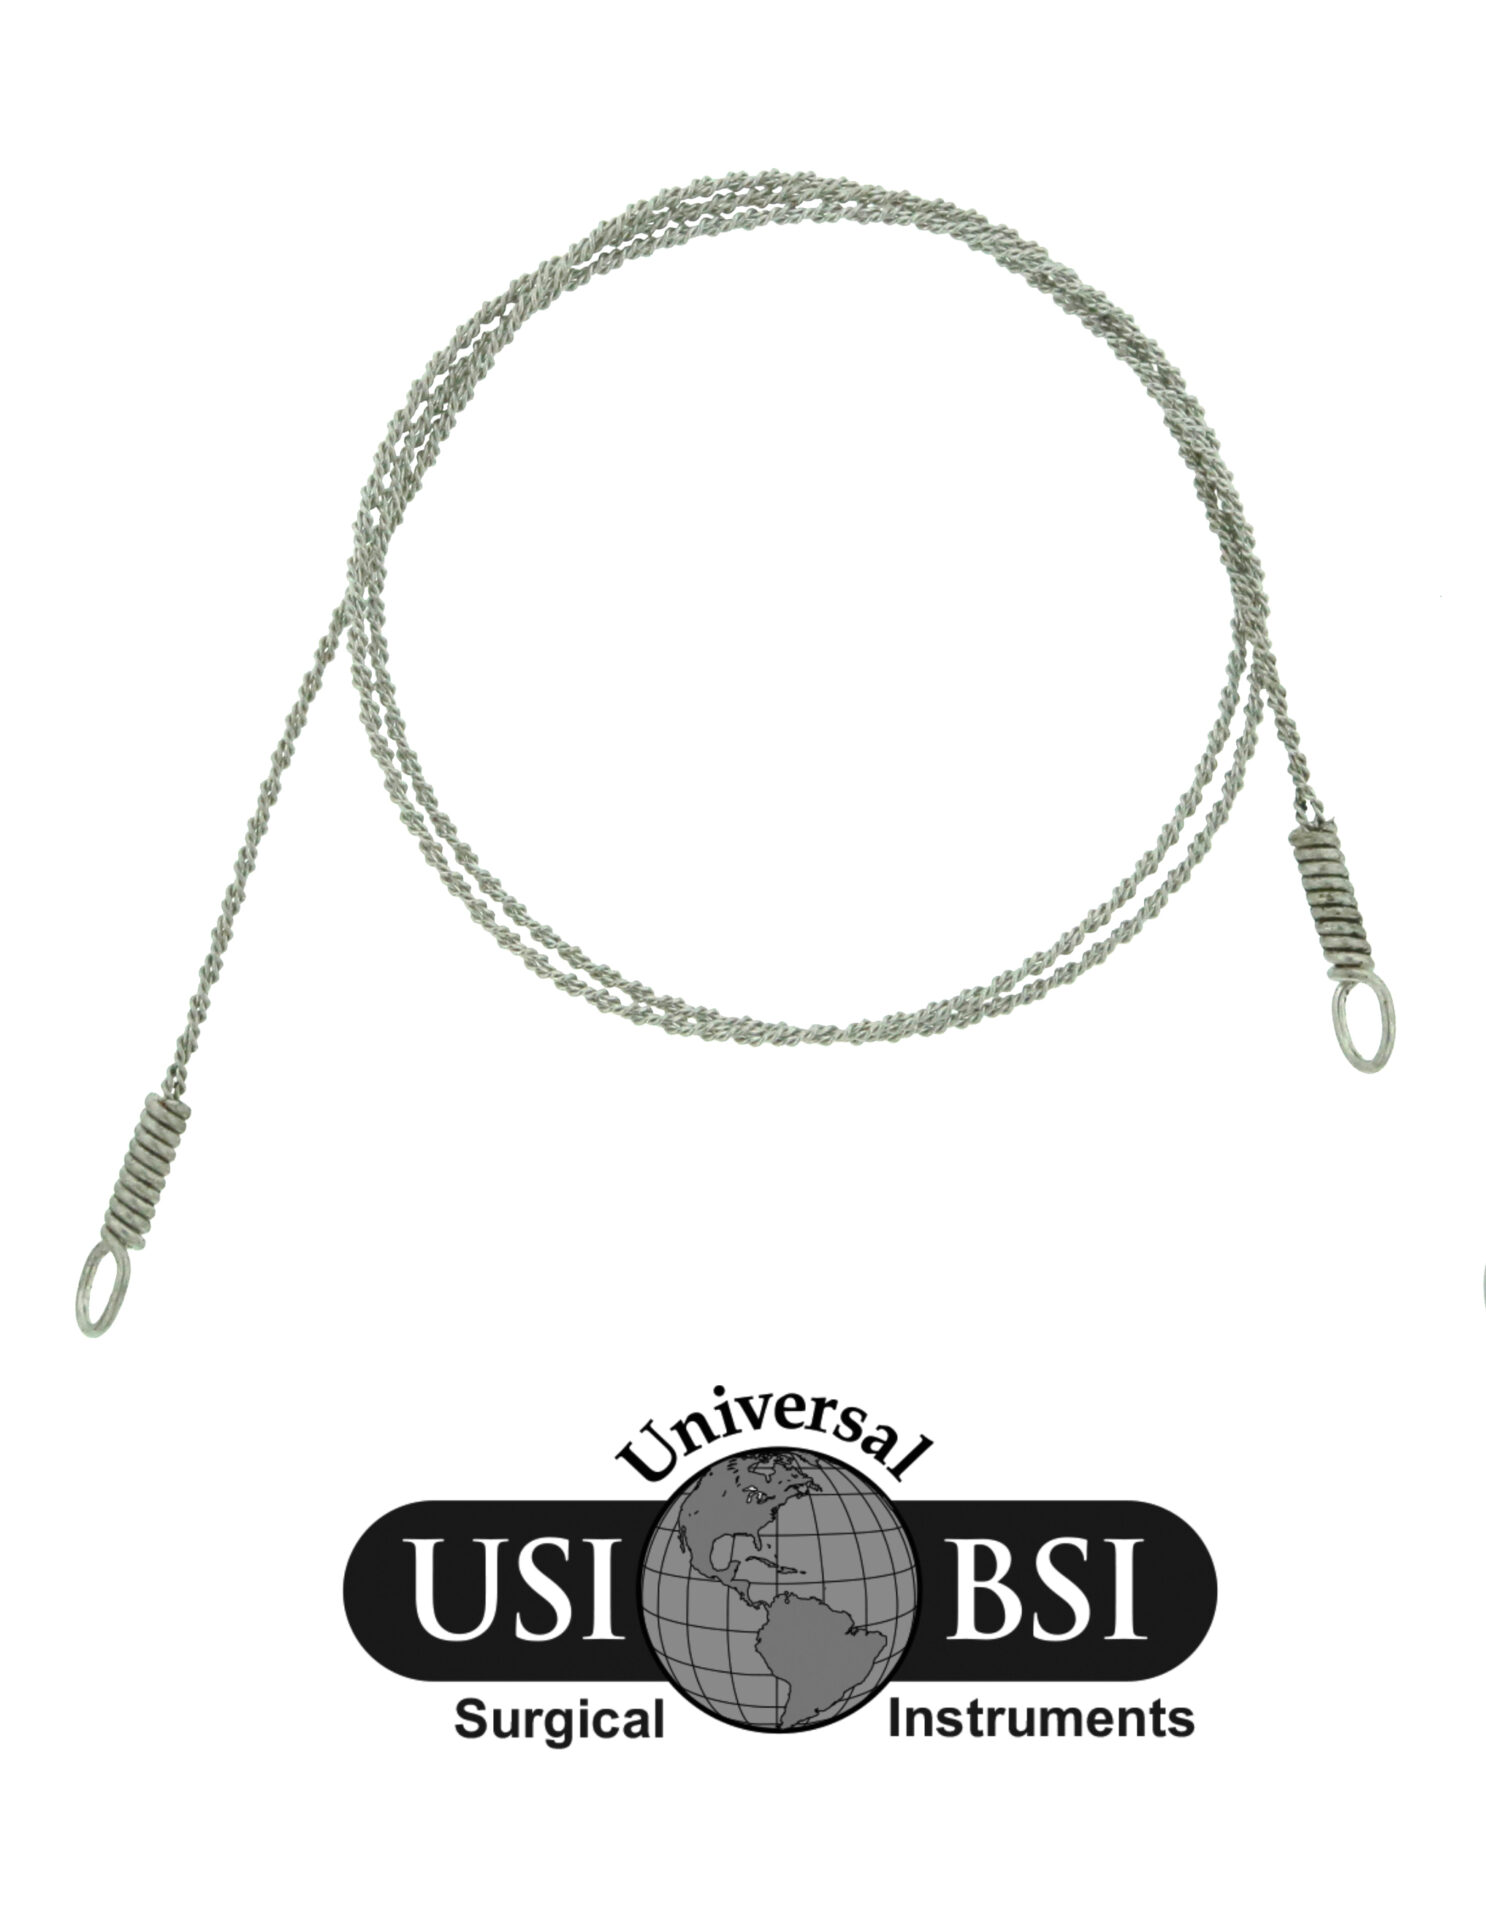 A picture of the universal bsi logo and a pair of glasses cords.